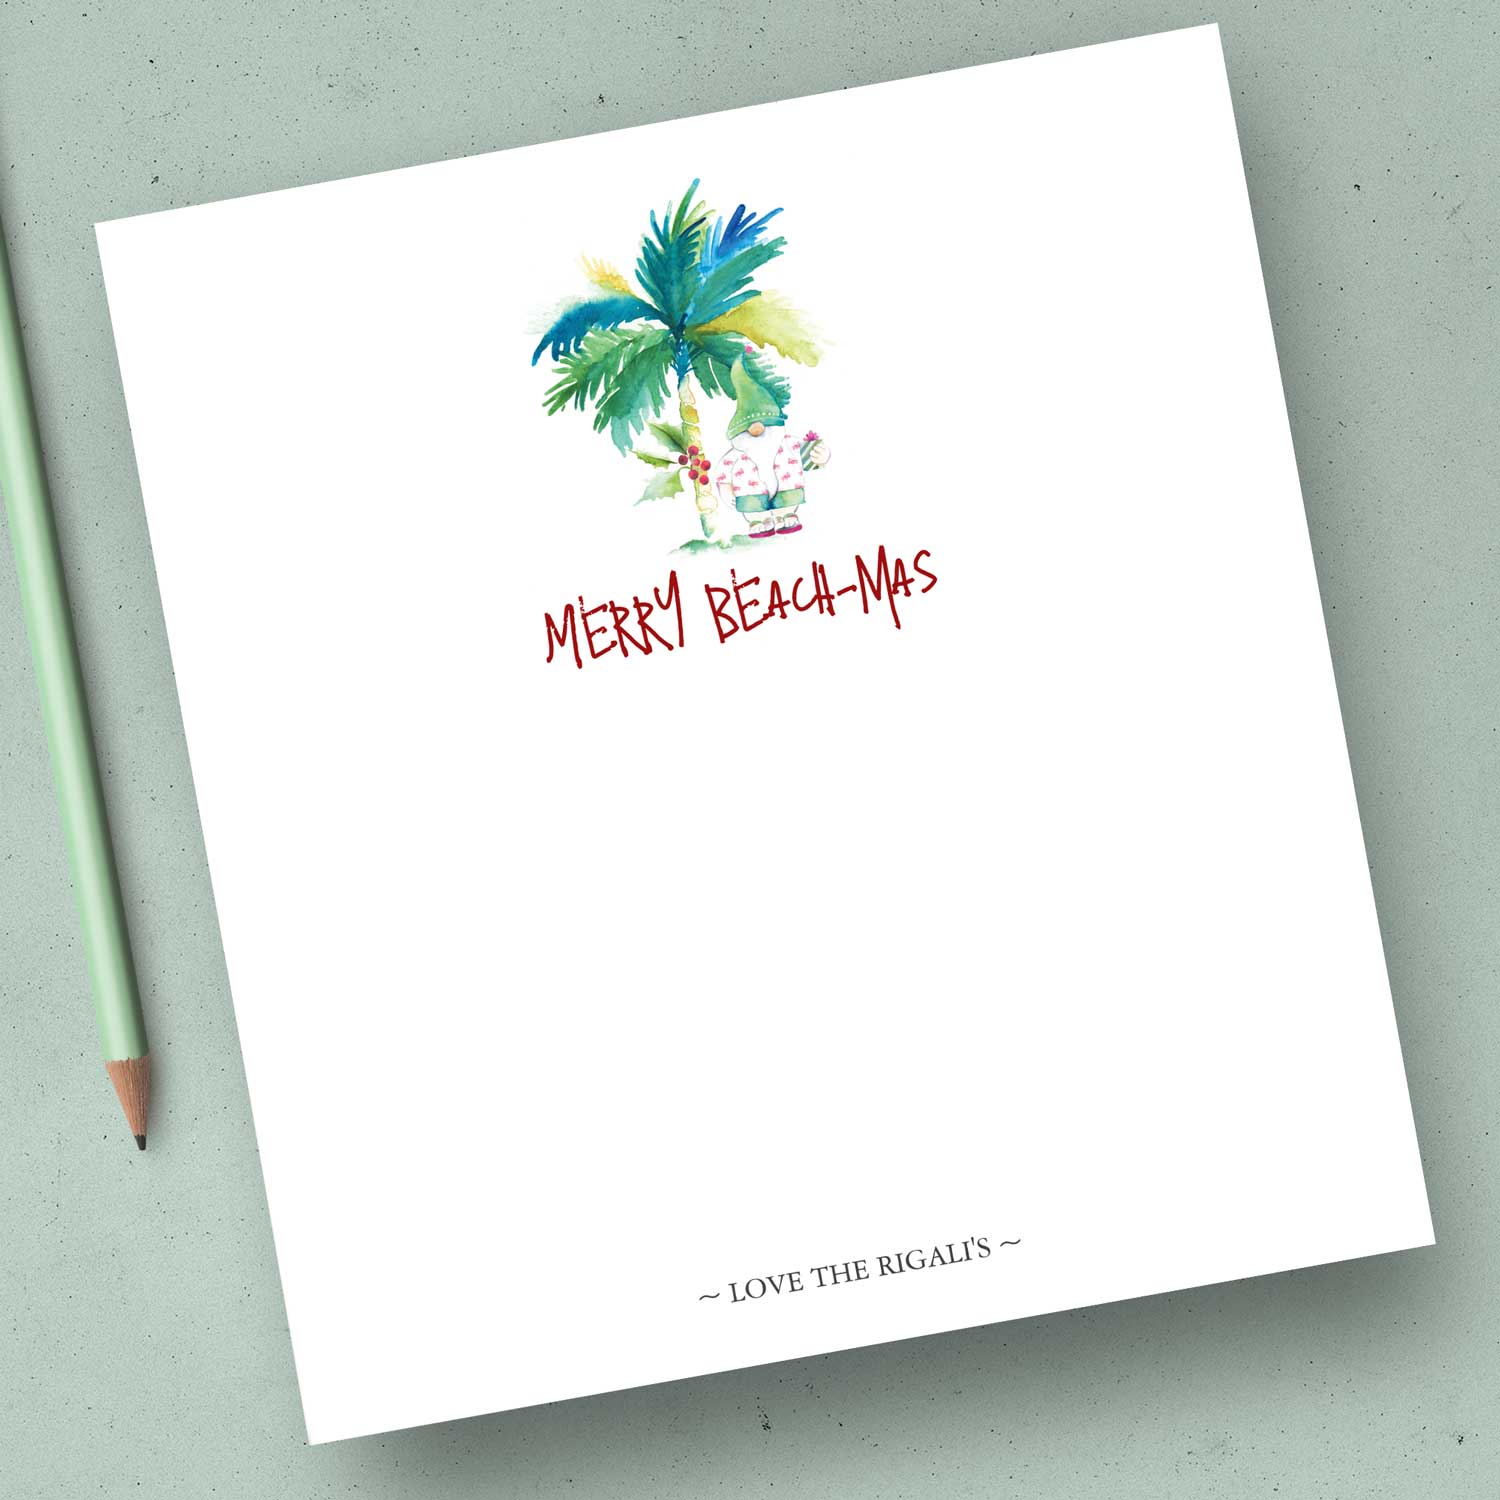 Christmas notepads feature watercolor palm tree and Santa in shorts with the words "Merry Beach-mas". Unique art by Victoria Grigaliunas of Do Tell A Belle. Click to shop.